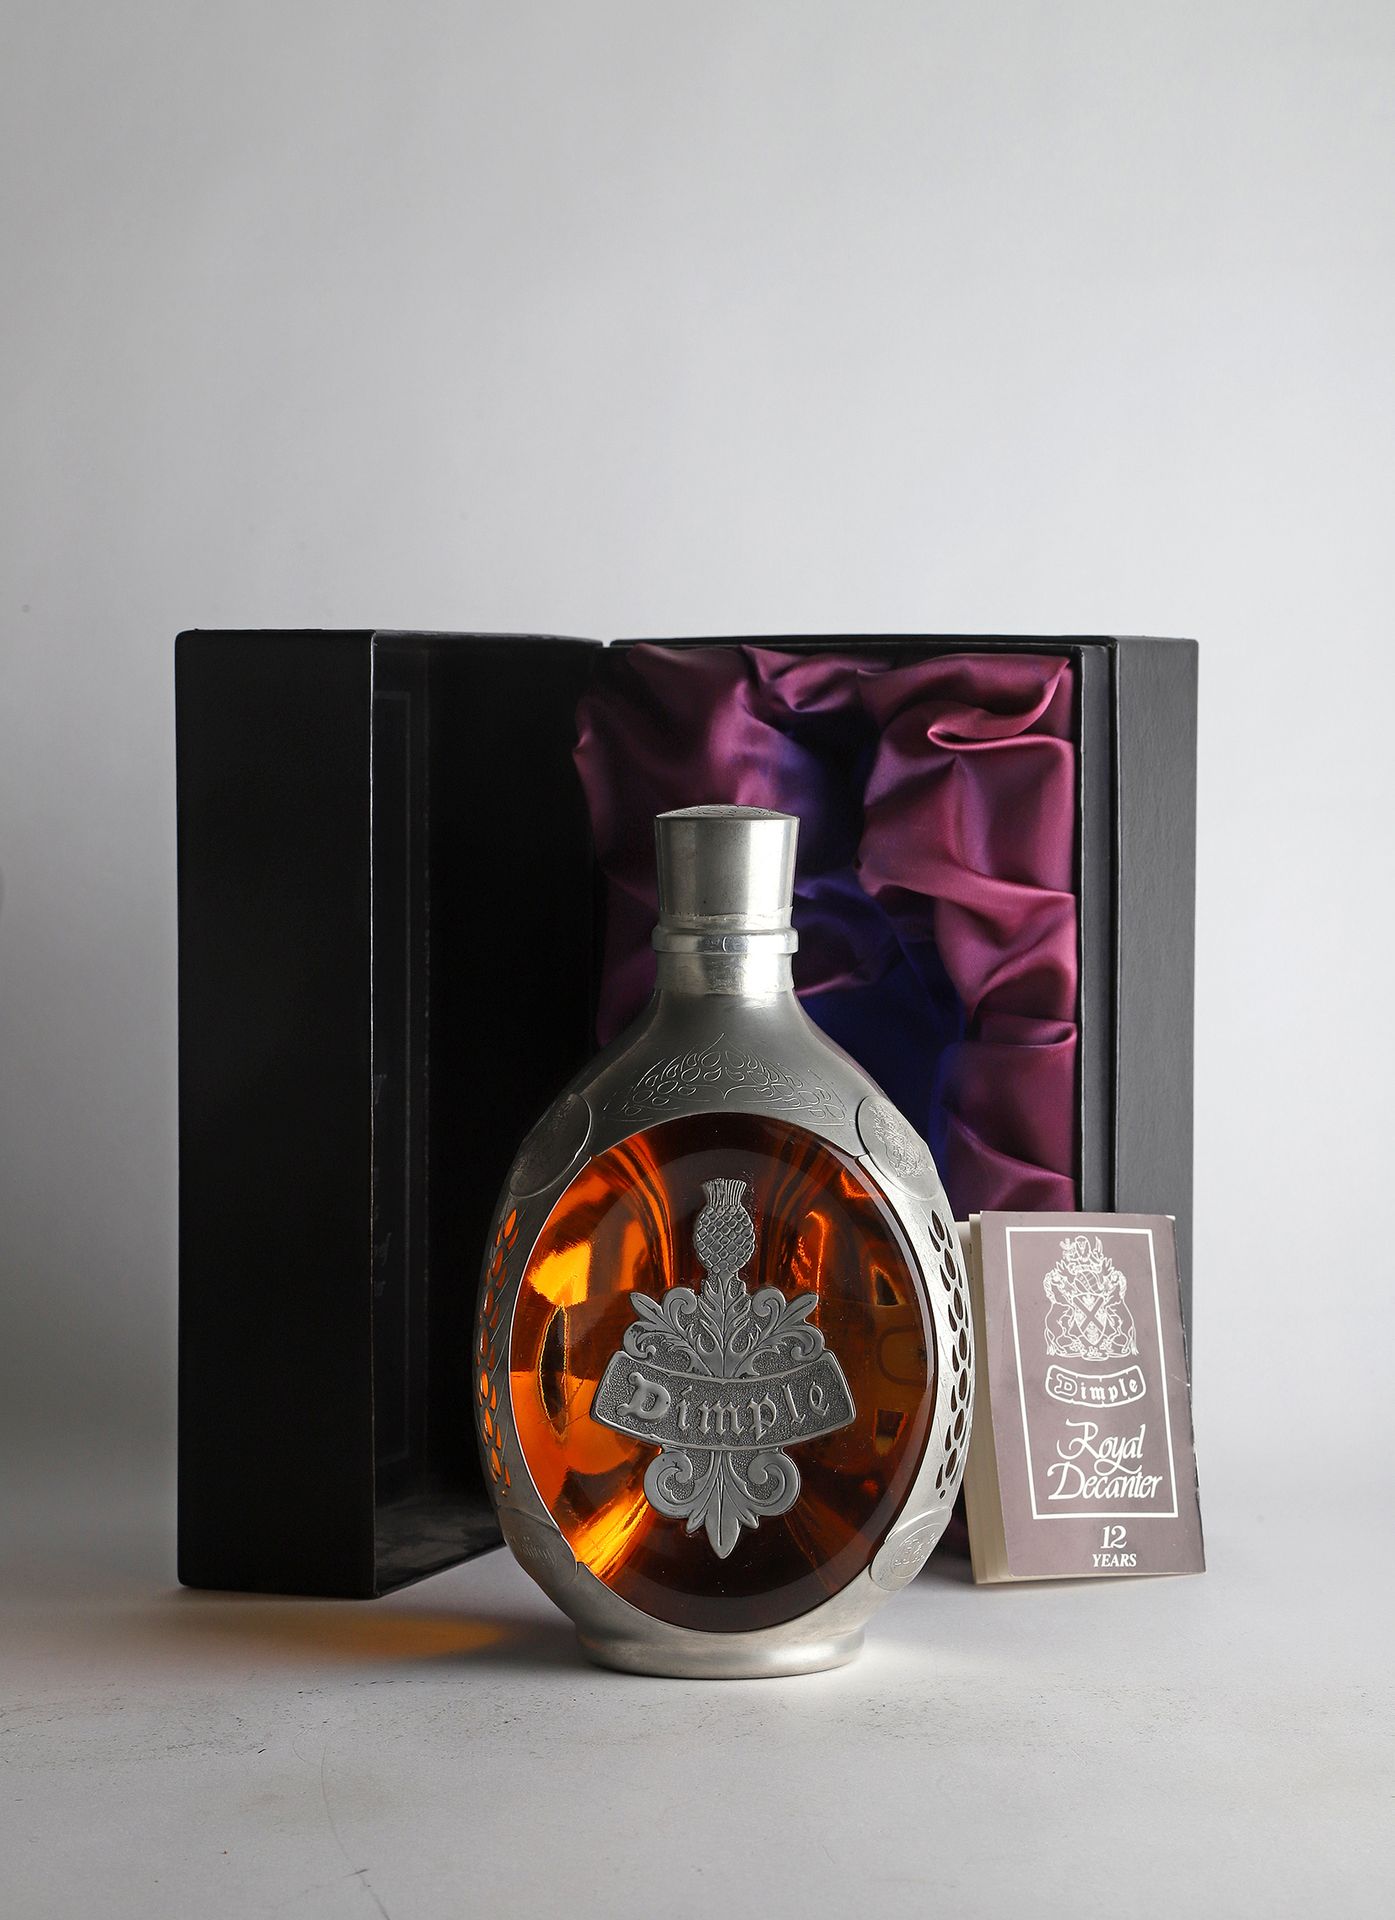 Null 1 B WHISKY ROYAL DECANTER 12 JAHRE ALT 75 cl 43% (Originalverpackung) - NM &hellip;